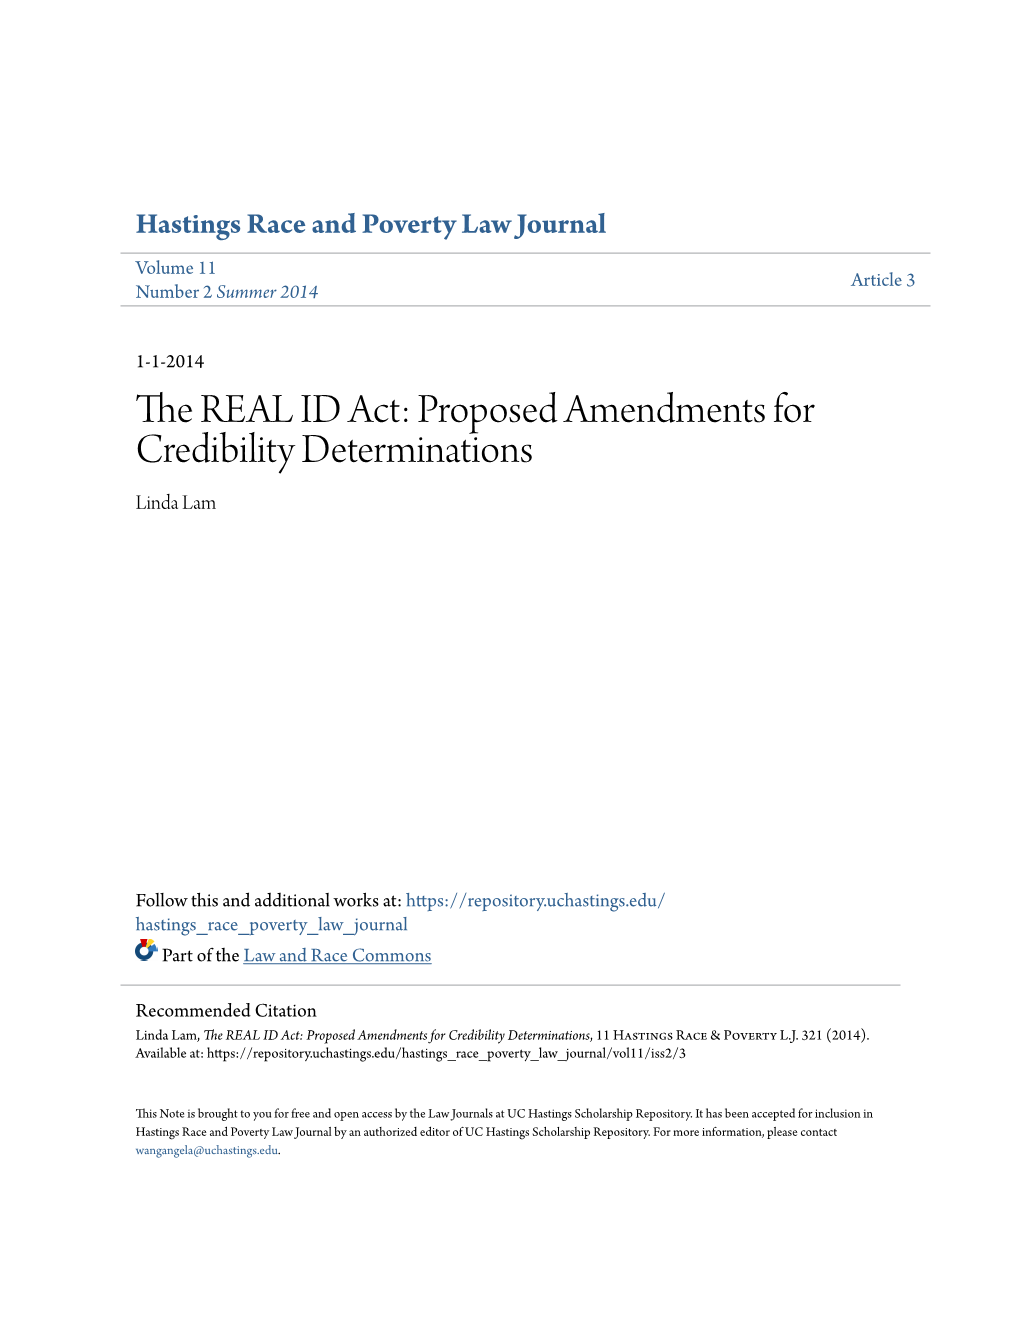 The REAL ID Act: Proposed Amendments for Credibility Determinations Linda Lam